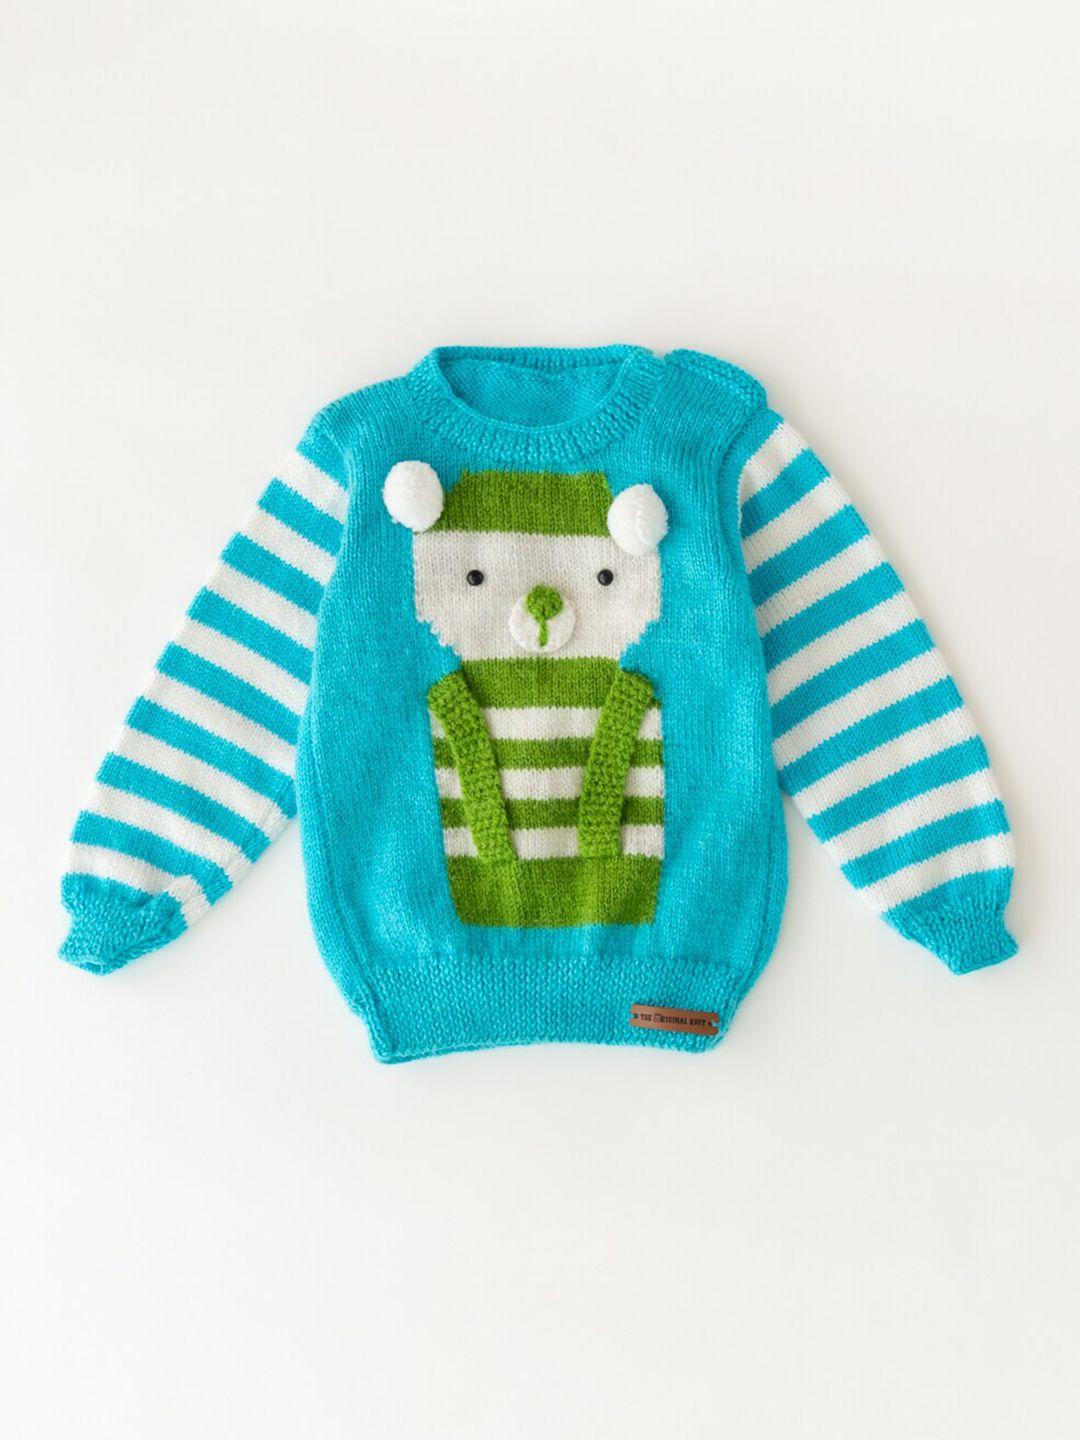 The Original Knit Infant Kids Striped Pullover Sweater